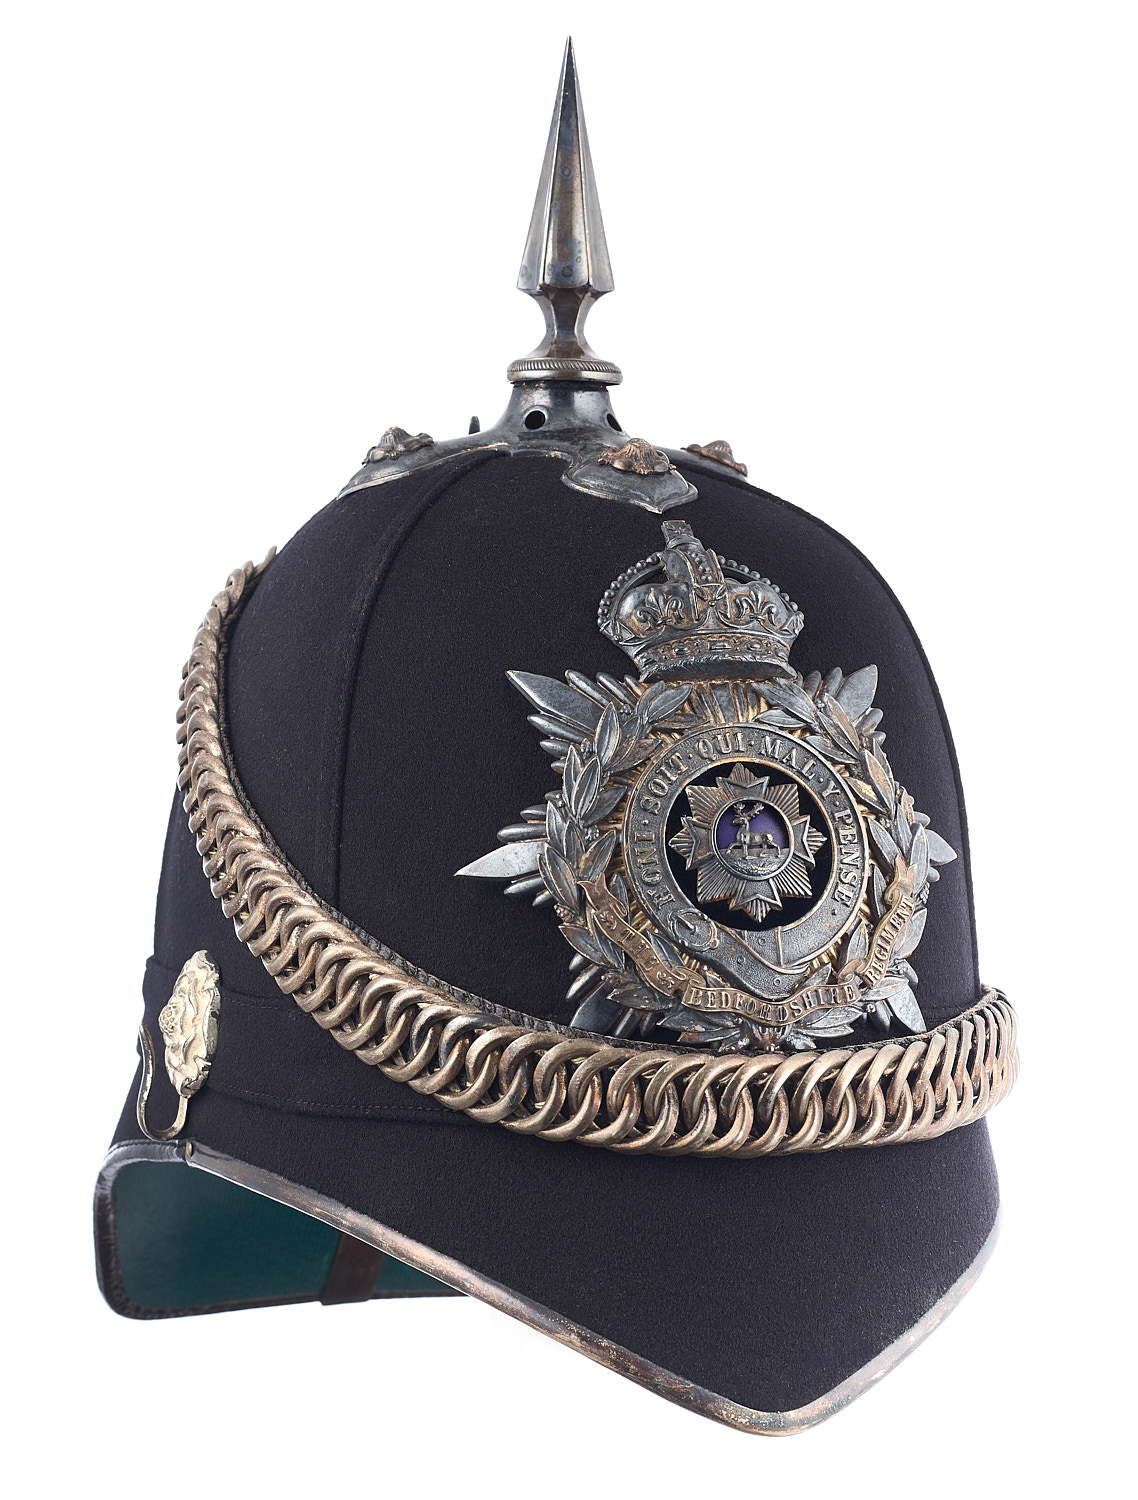 Bedfordshire Regiment Officer Home Service Helmet and Uniforms A collection of uniforms worn by - Image 2 of 6